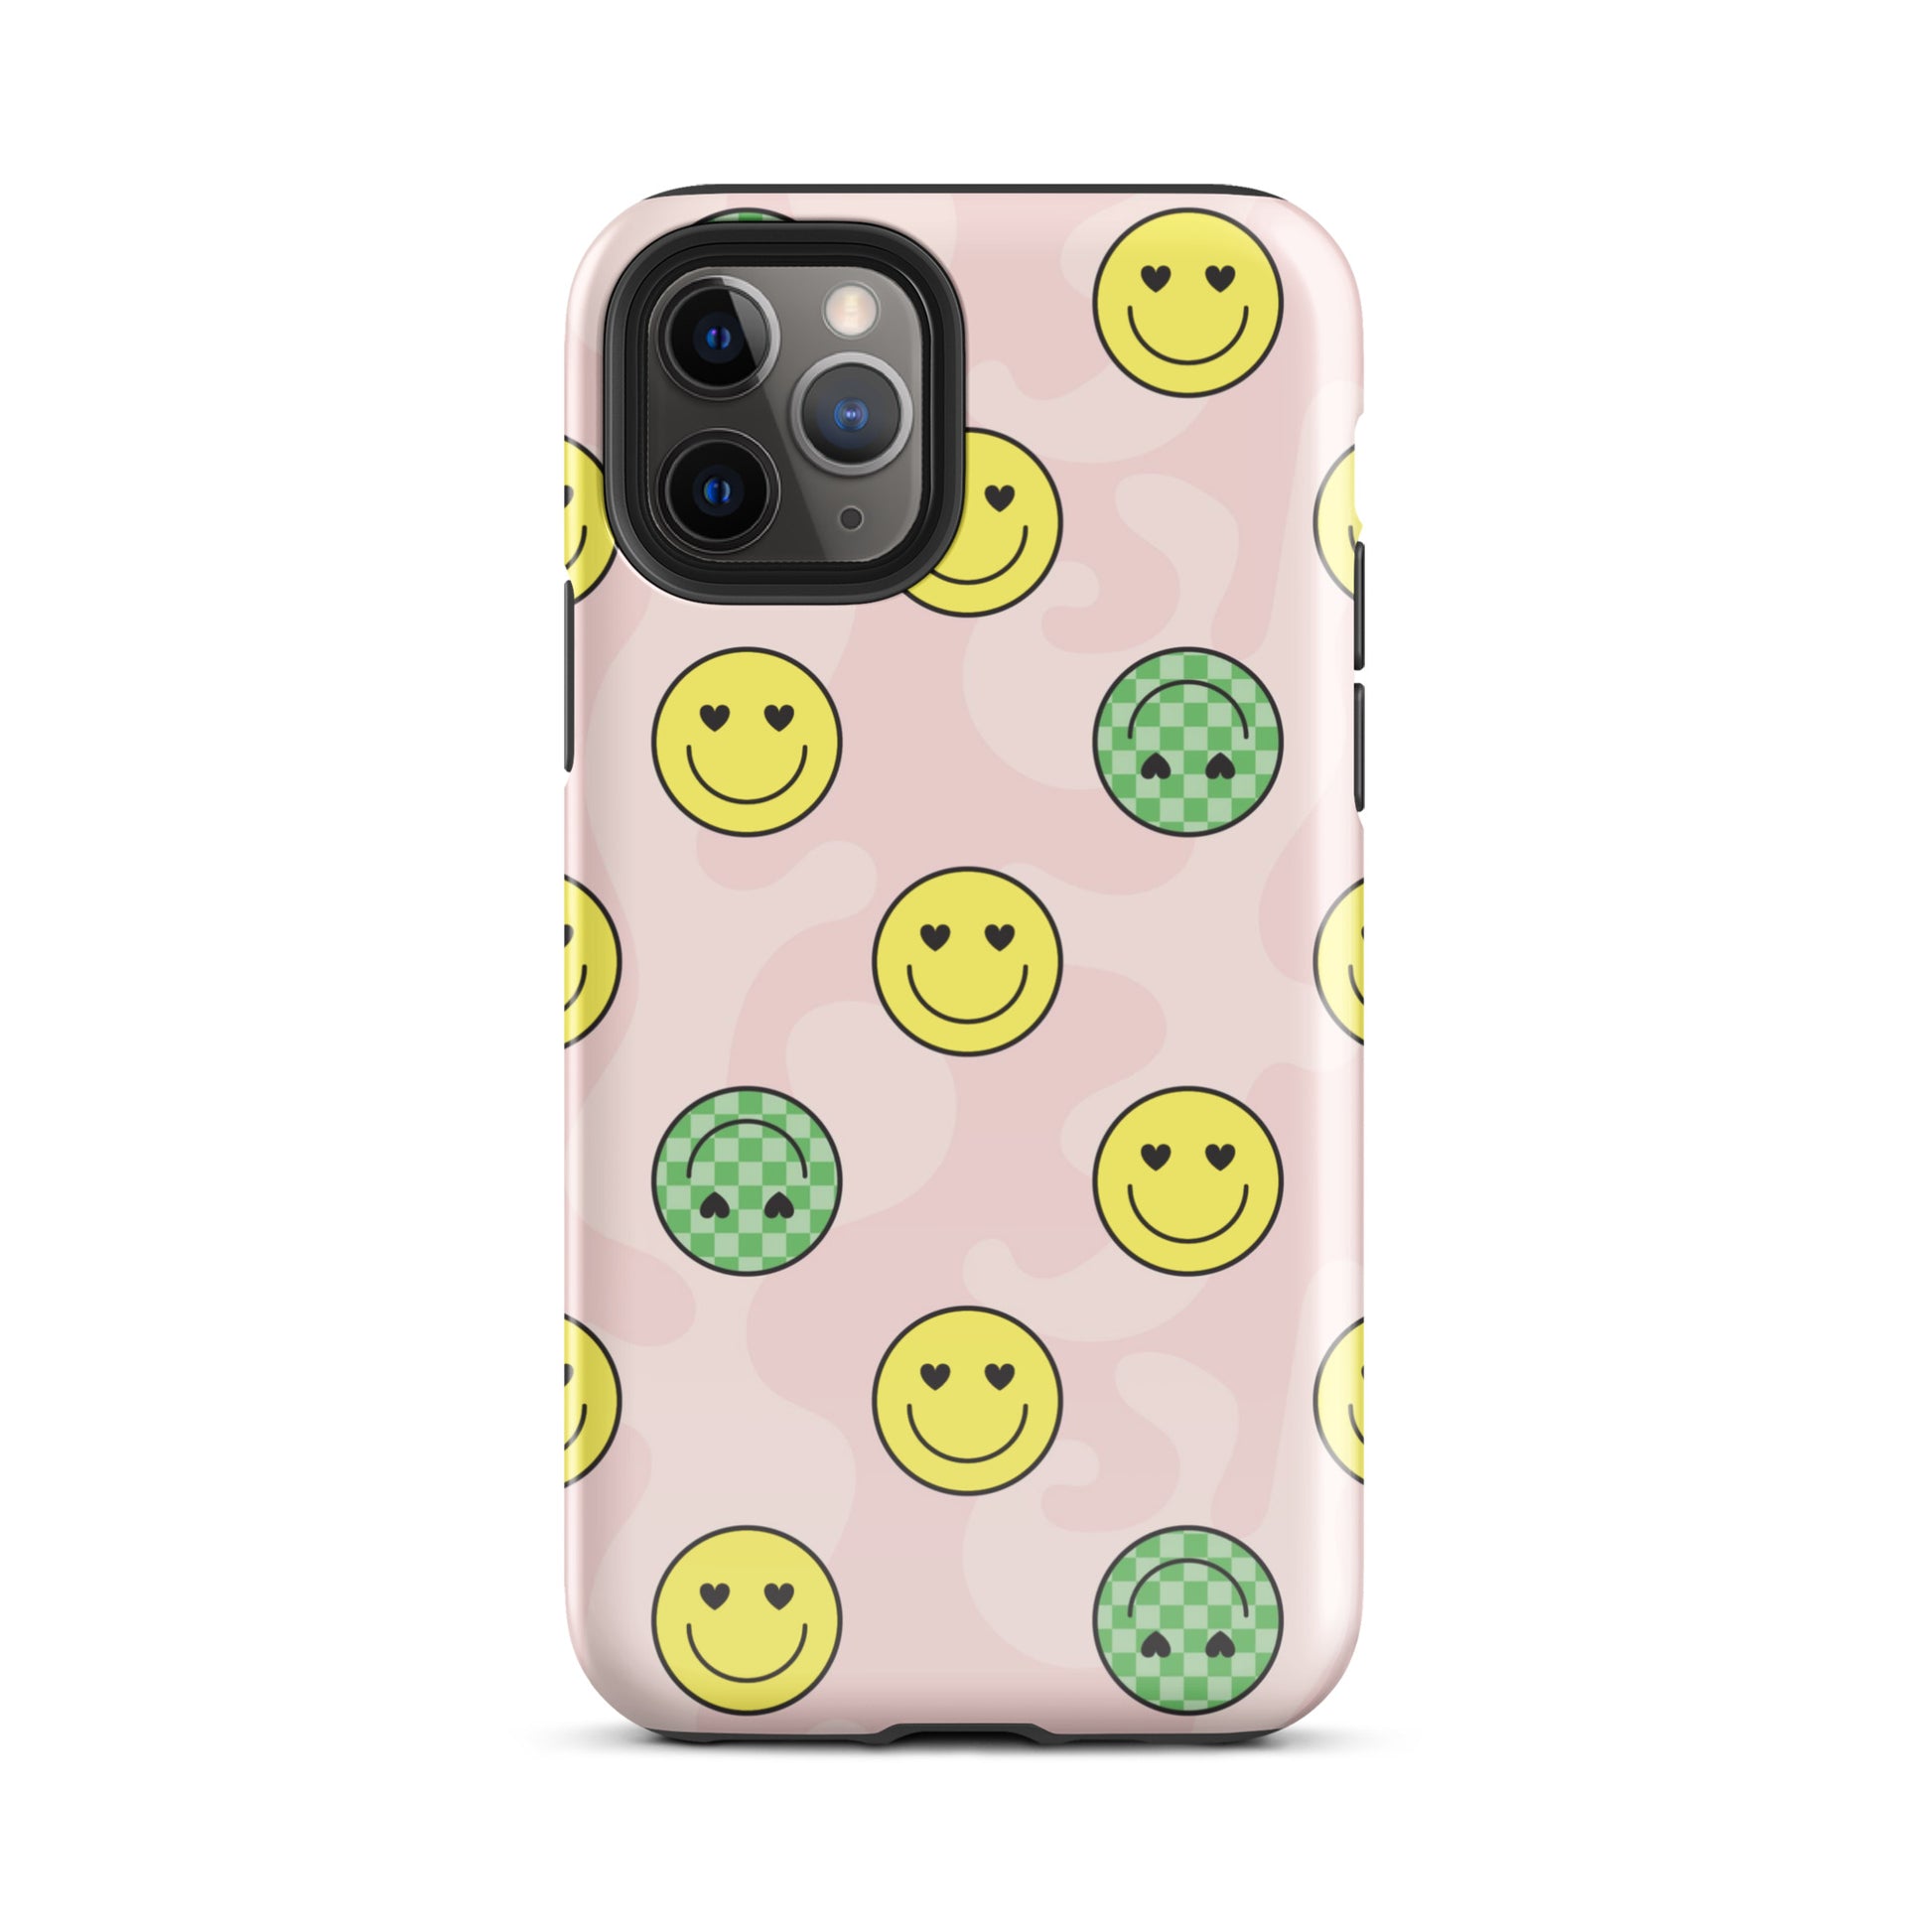 Preppy Smiley Faces iPhone Case iPhone 11 Pro Glossy